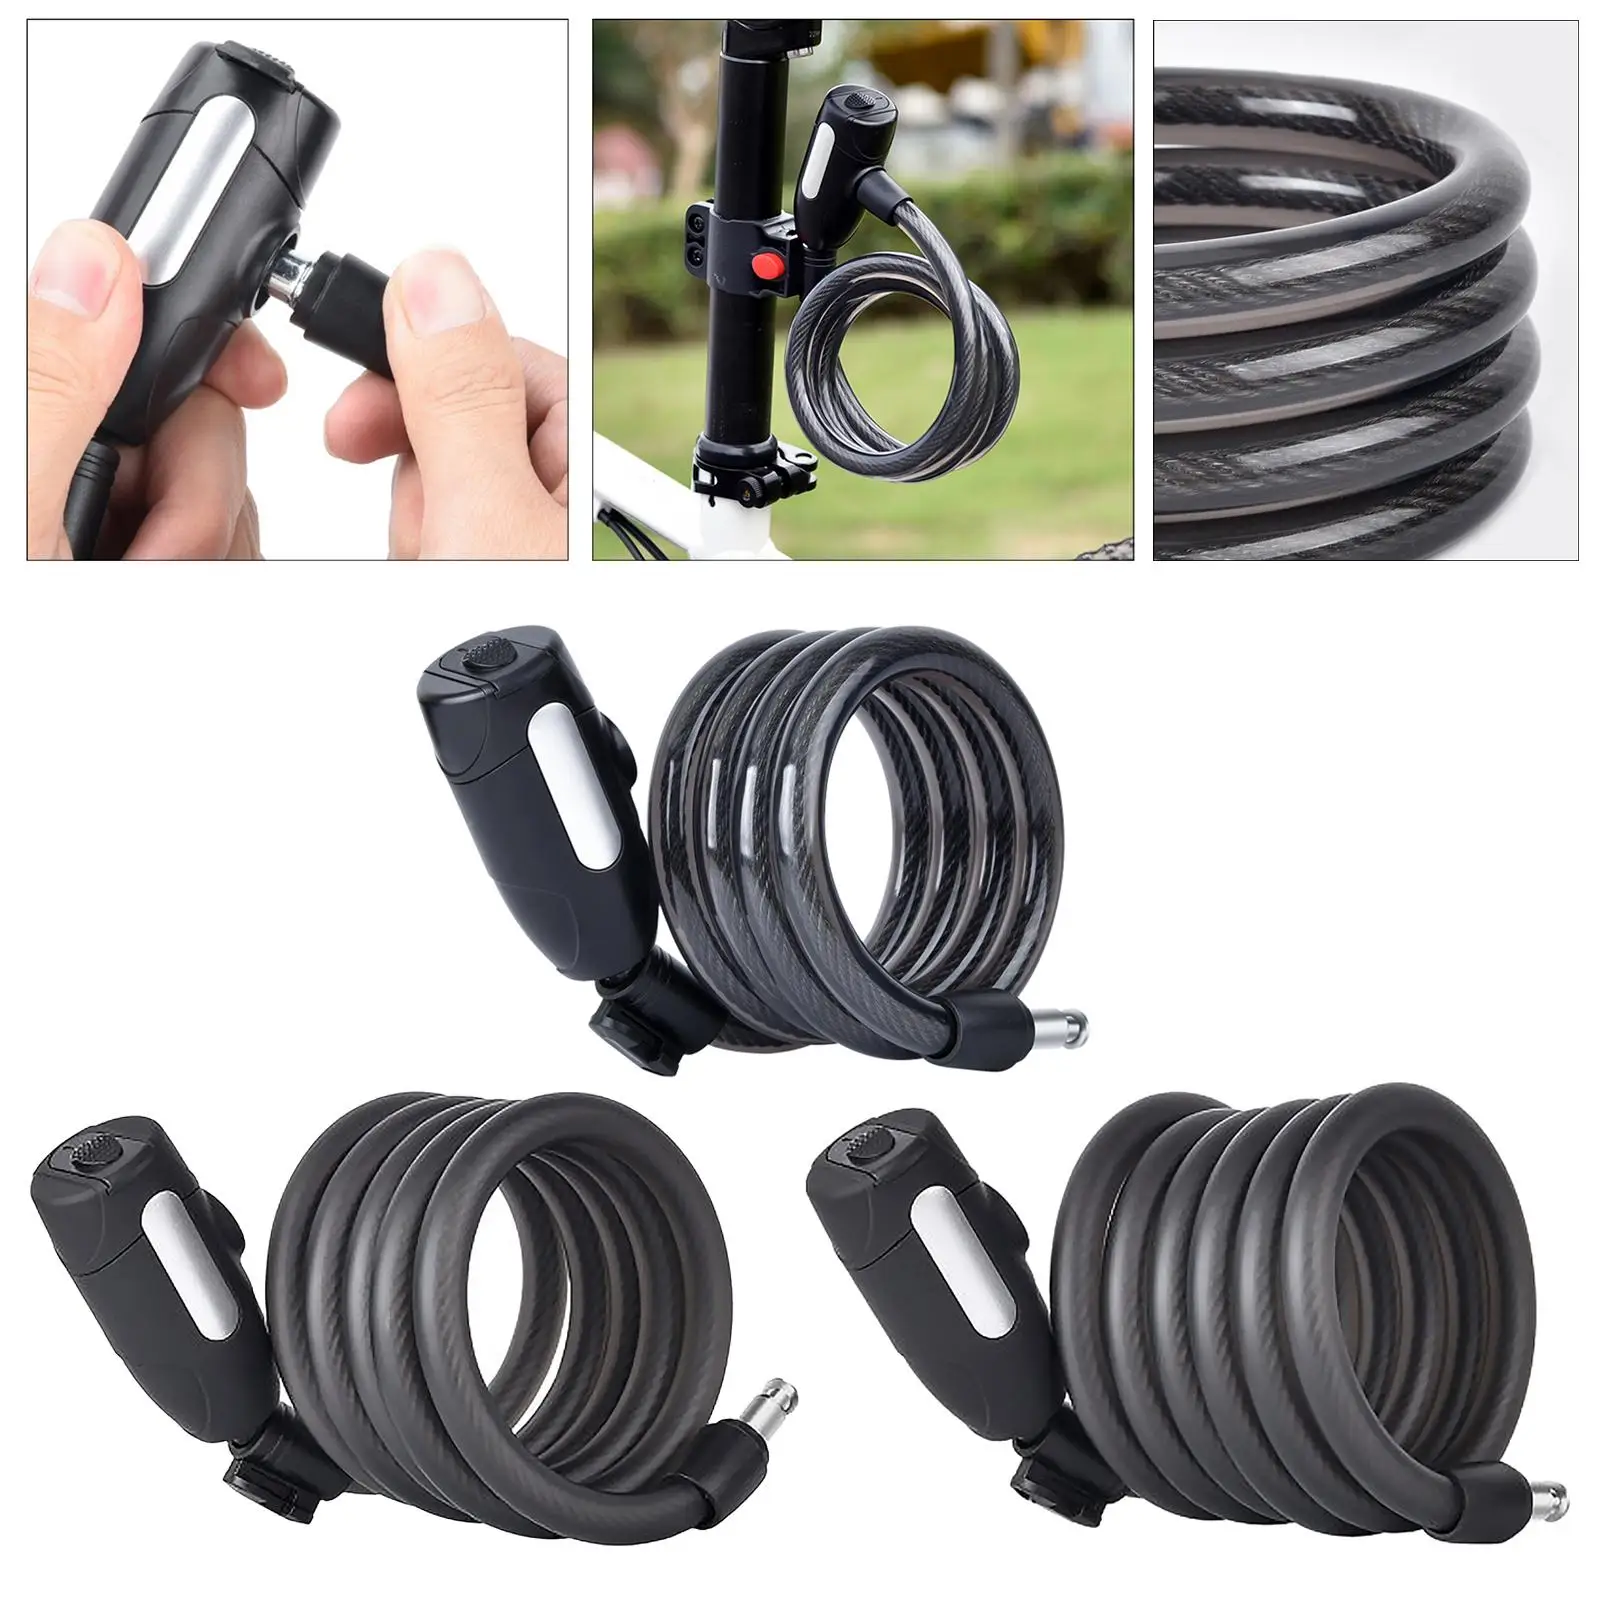 Bike Lock Anti Theft Security Bicycle Accessories Cable Lock MTB Road Bike Motorcycle Cycling Steel Safety Lock